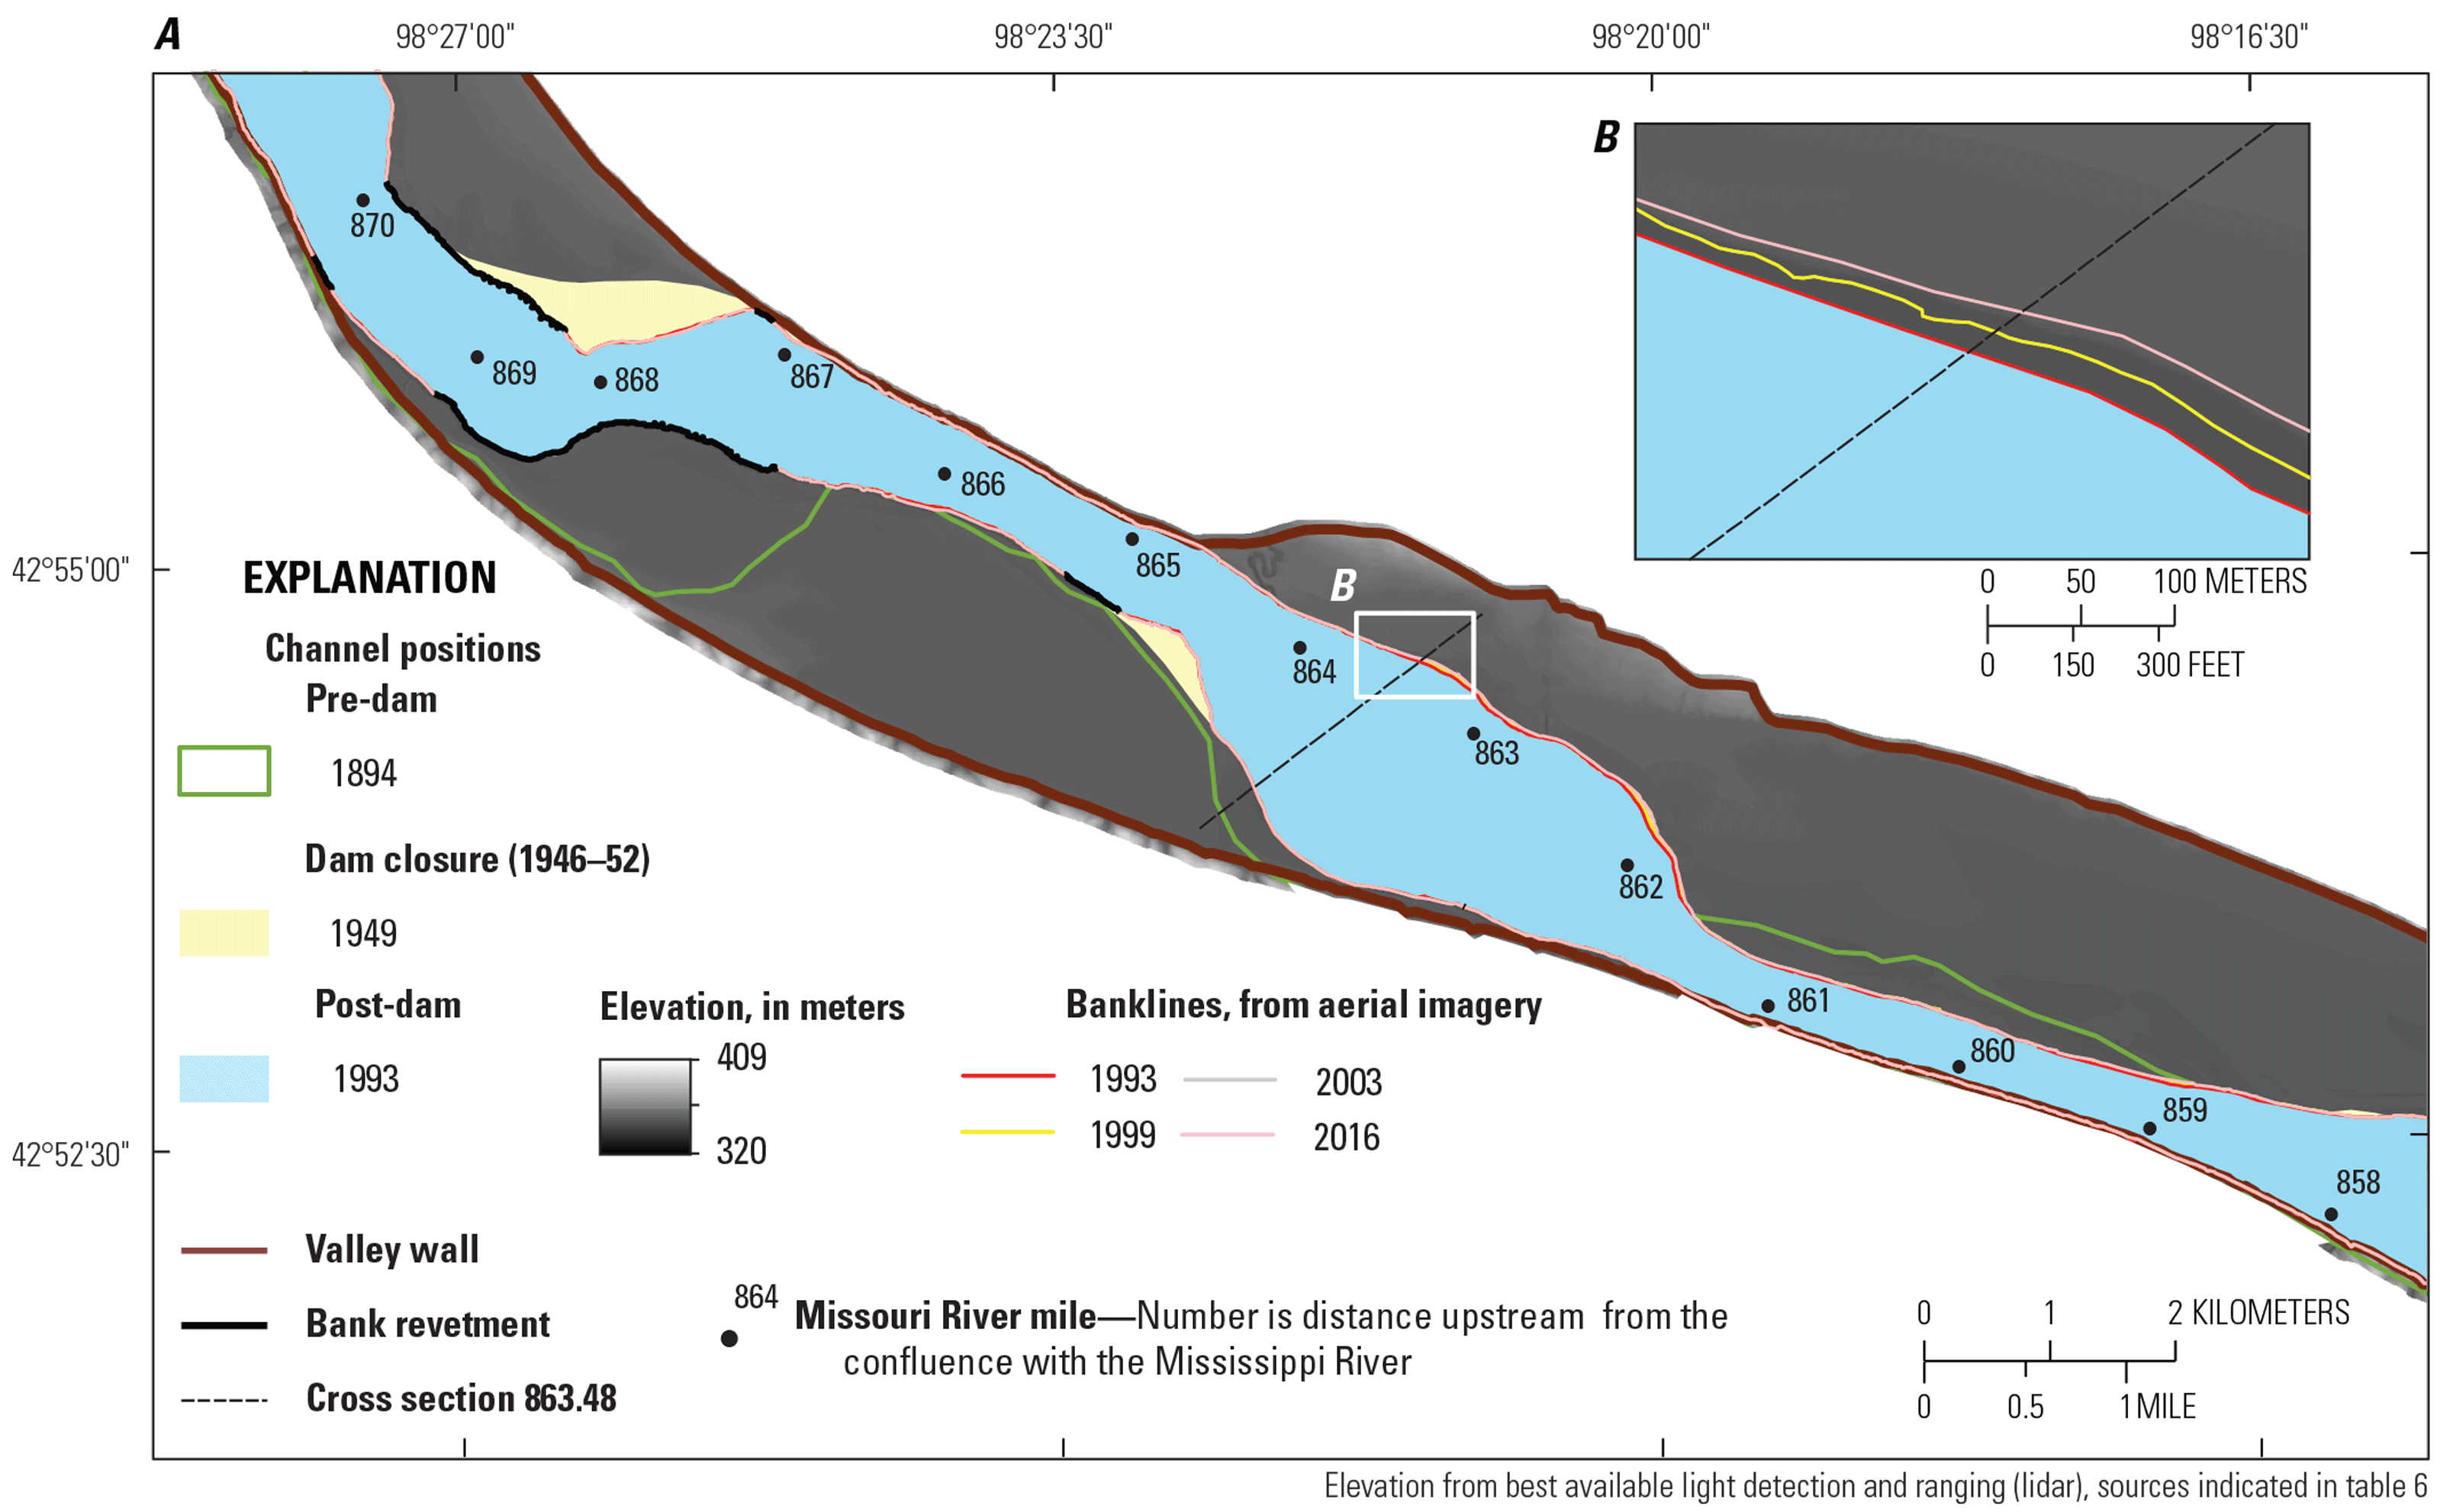 Map showing channel positions pre- and post-dam, during dam closure, with elevation
                        and lines for banklines